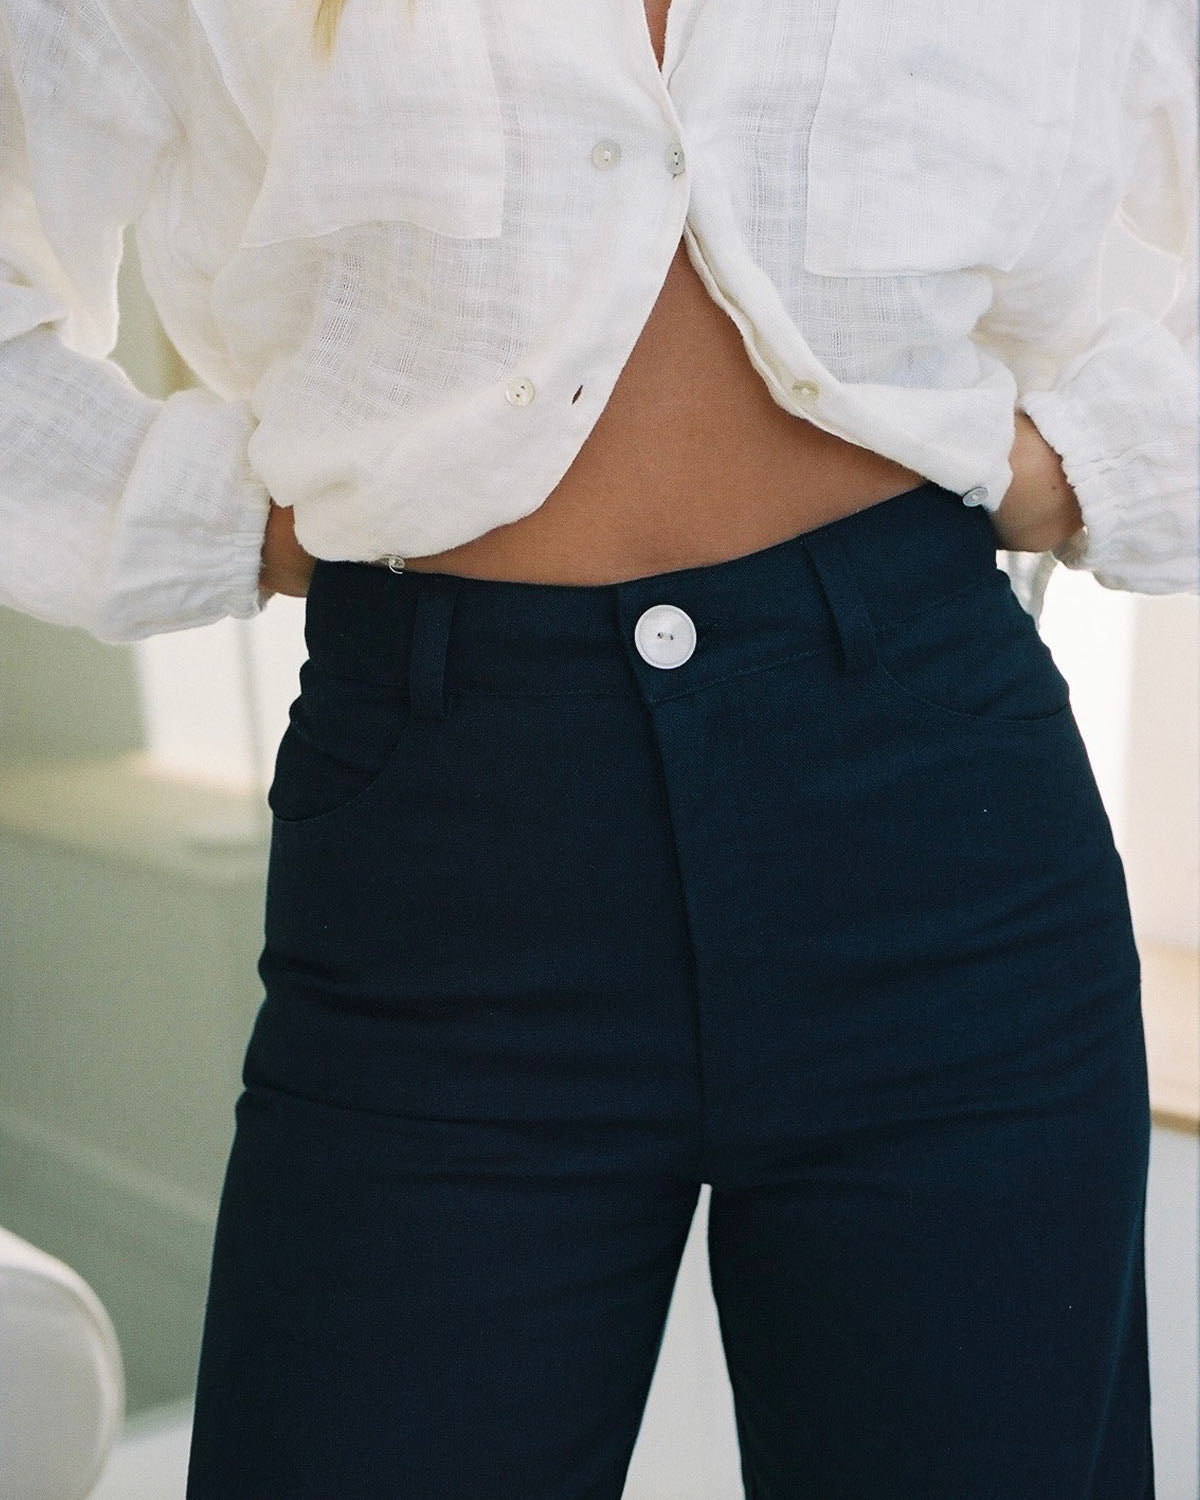 The Pierrot Pants are our modern day, eco-friendly take on the iconic sailor pant. This high rise, wide leg crop classic is made with hemp and organic cotton and is the sustainable essential of our dreams. Handmade with a hemp and organic cotton blend in Vancouver, BC.